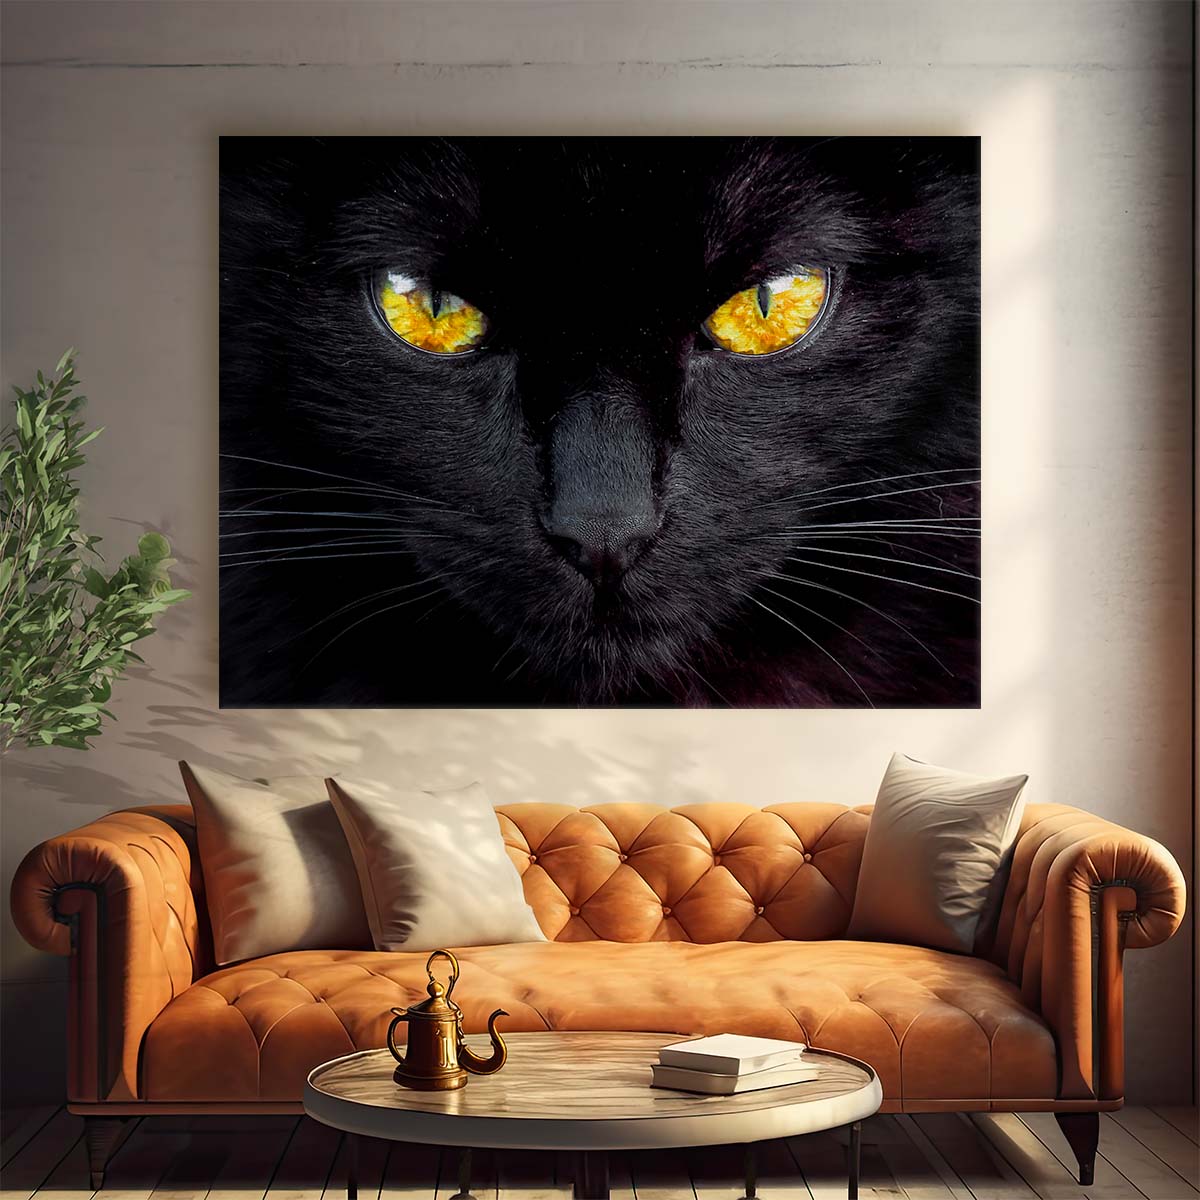 Hypnotic Gaze Black Cat Yellow Eyes Wall Art by Luxuriance Designs. Made in USA.